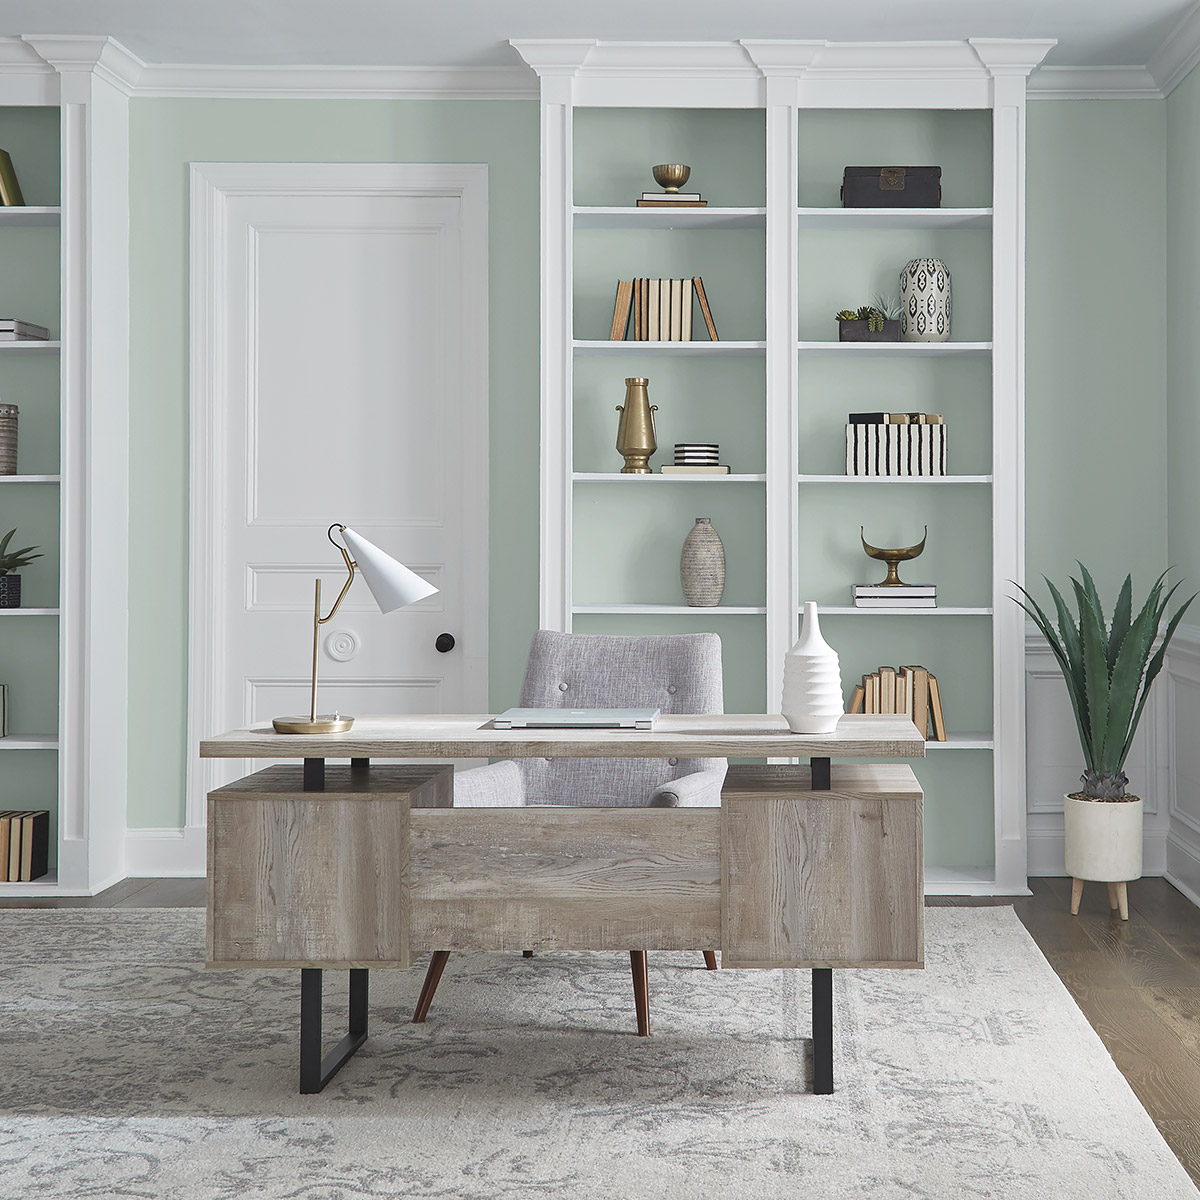 An office with the walls painted in a soft sea glass green hue.